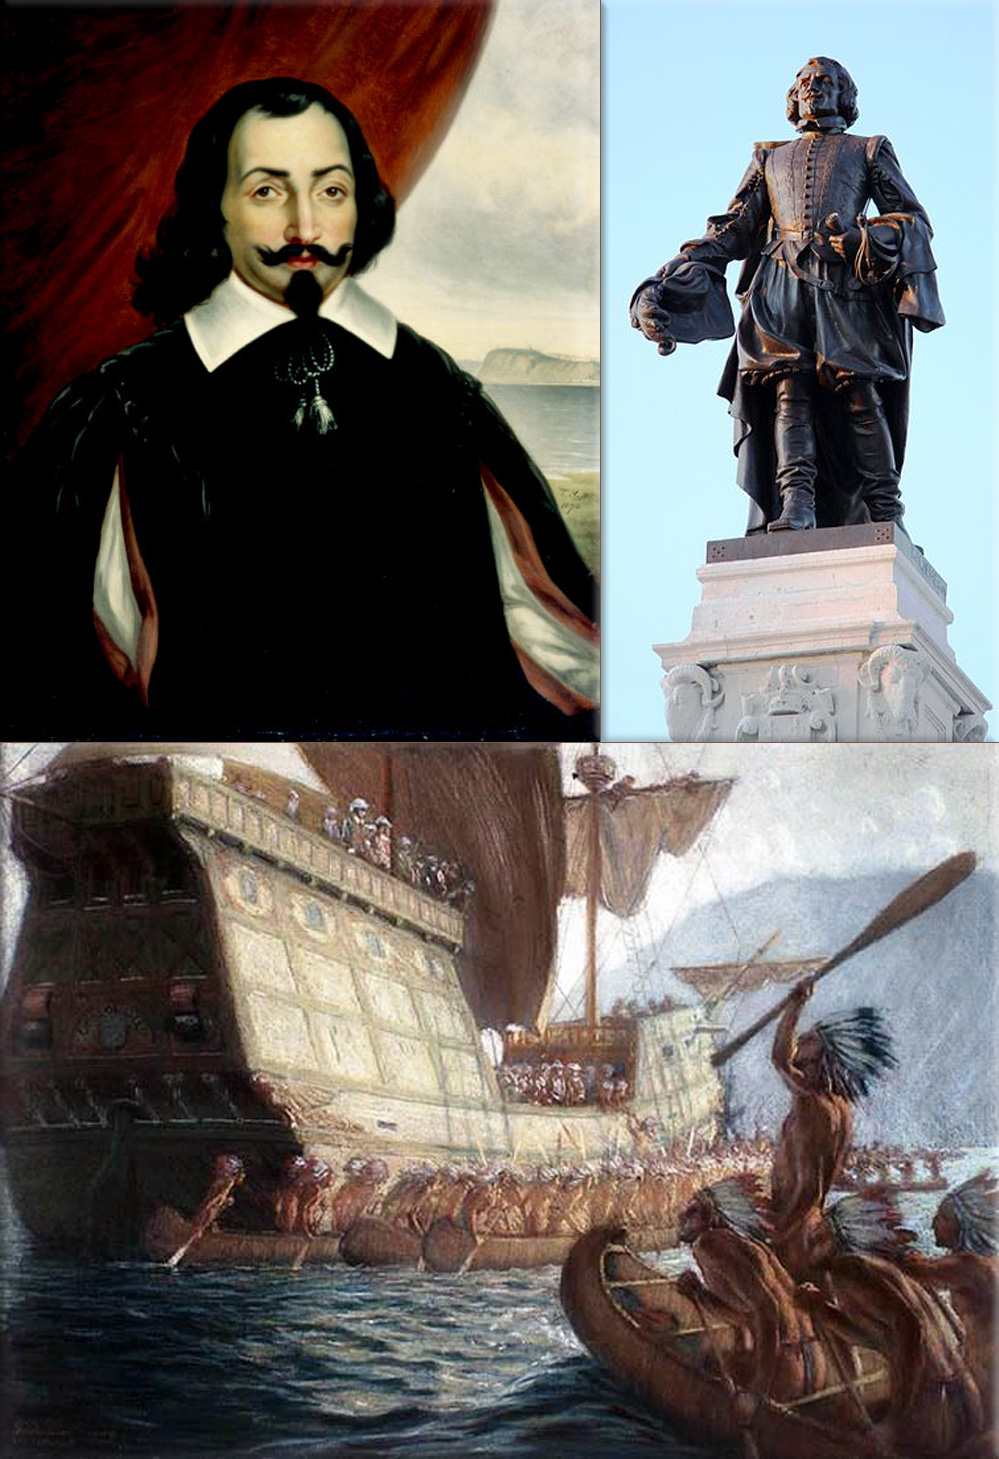 Samuel de Champlain: Statue of Samuel de Champlain at sunrise (looking to the north-west; with a similar expressive face as traditionally Jacques Cartier's) ● Painting by George Agnew Reid, done for the third centennial (1908), showing the arrival of Samuel de Champlain on the site of Quebec City